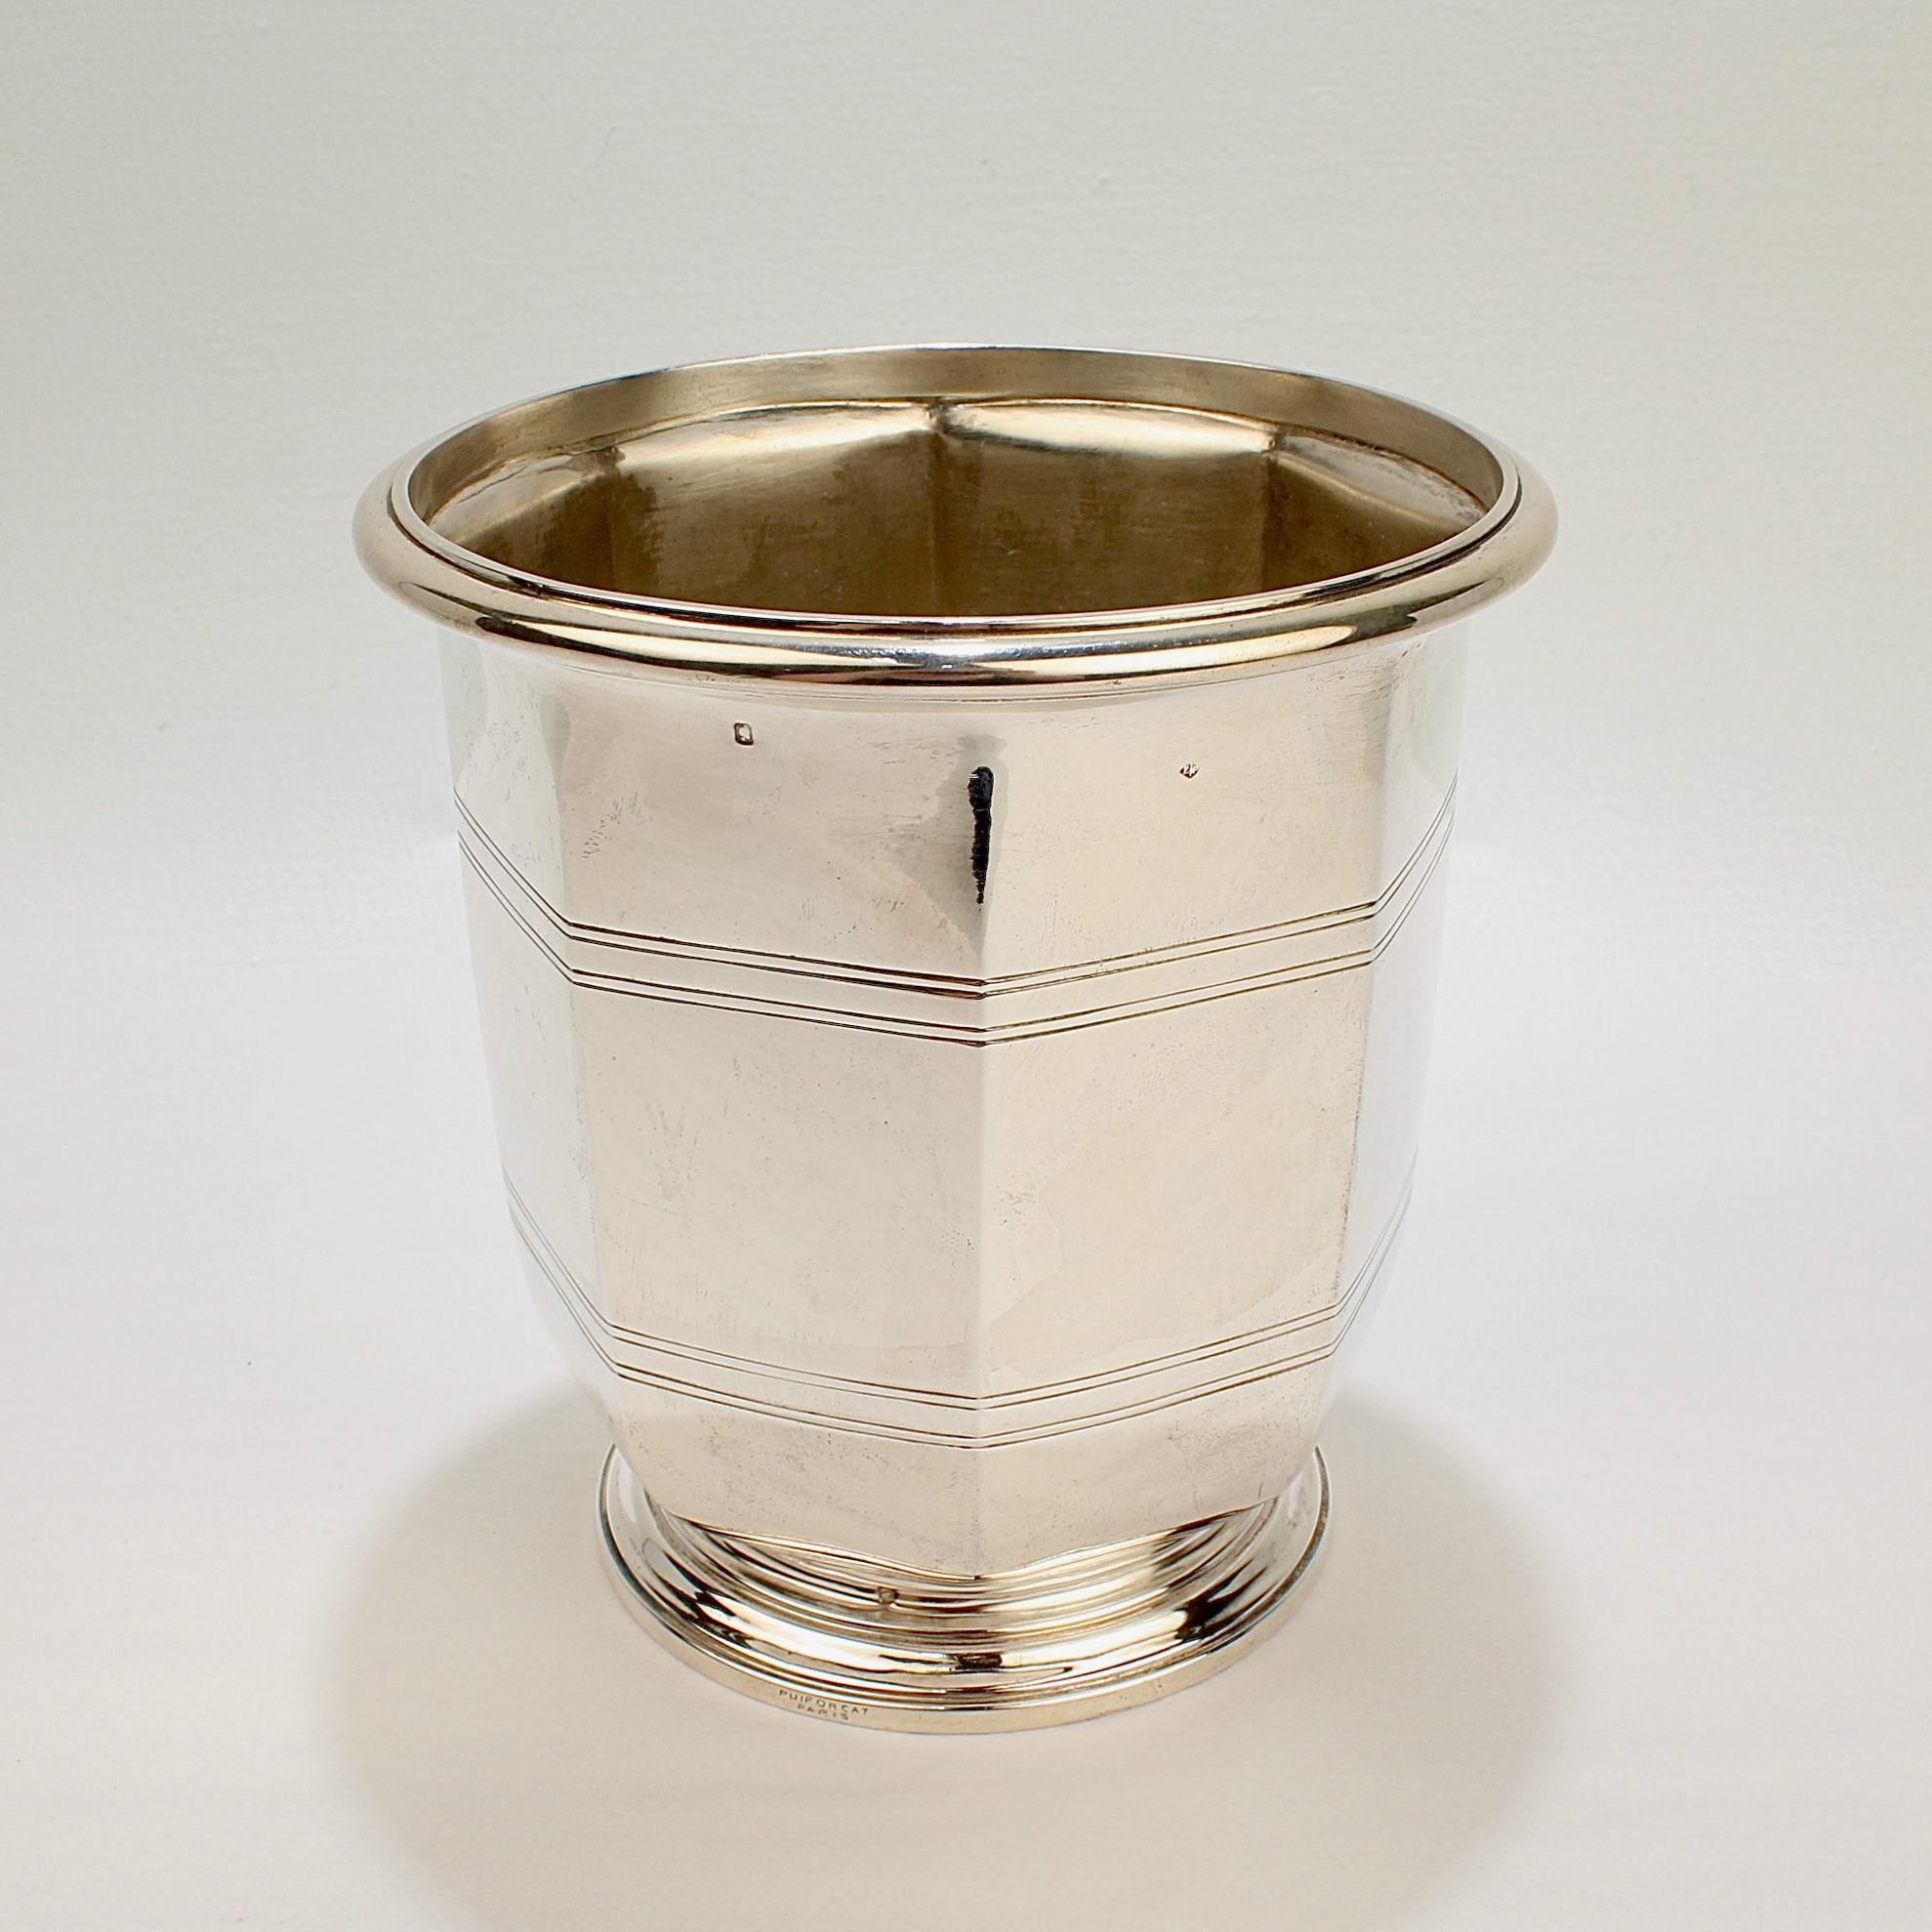 An exceptionally rare Puiforcat sterling silver wine bucket or champagne cooler.

Fully hallmarked and engraved with a block letter PUIFORCAT PARIS mark to the foot.

A rare and fine example of French Art Deco period craft and design!

Date:
Early